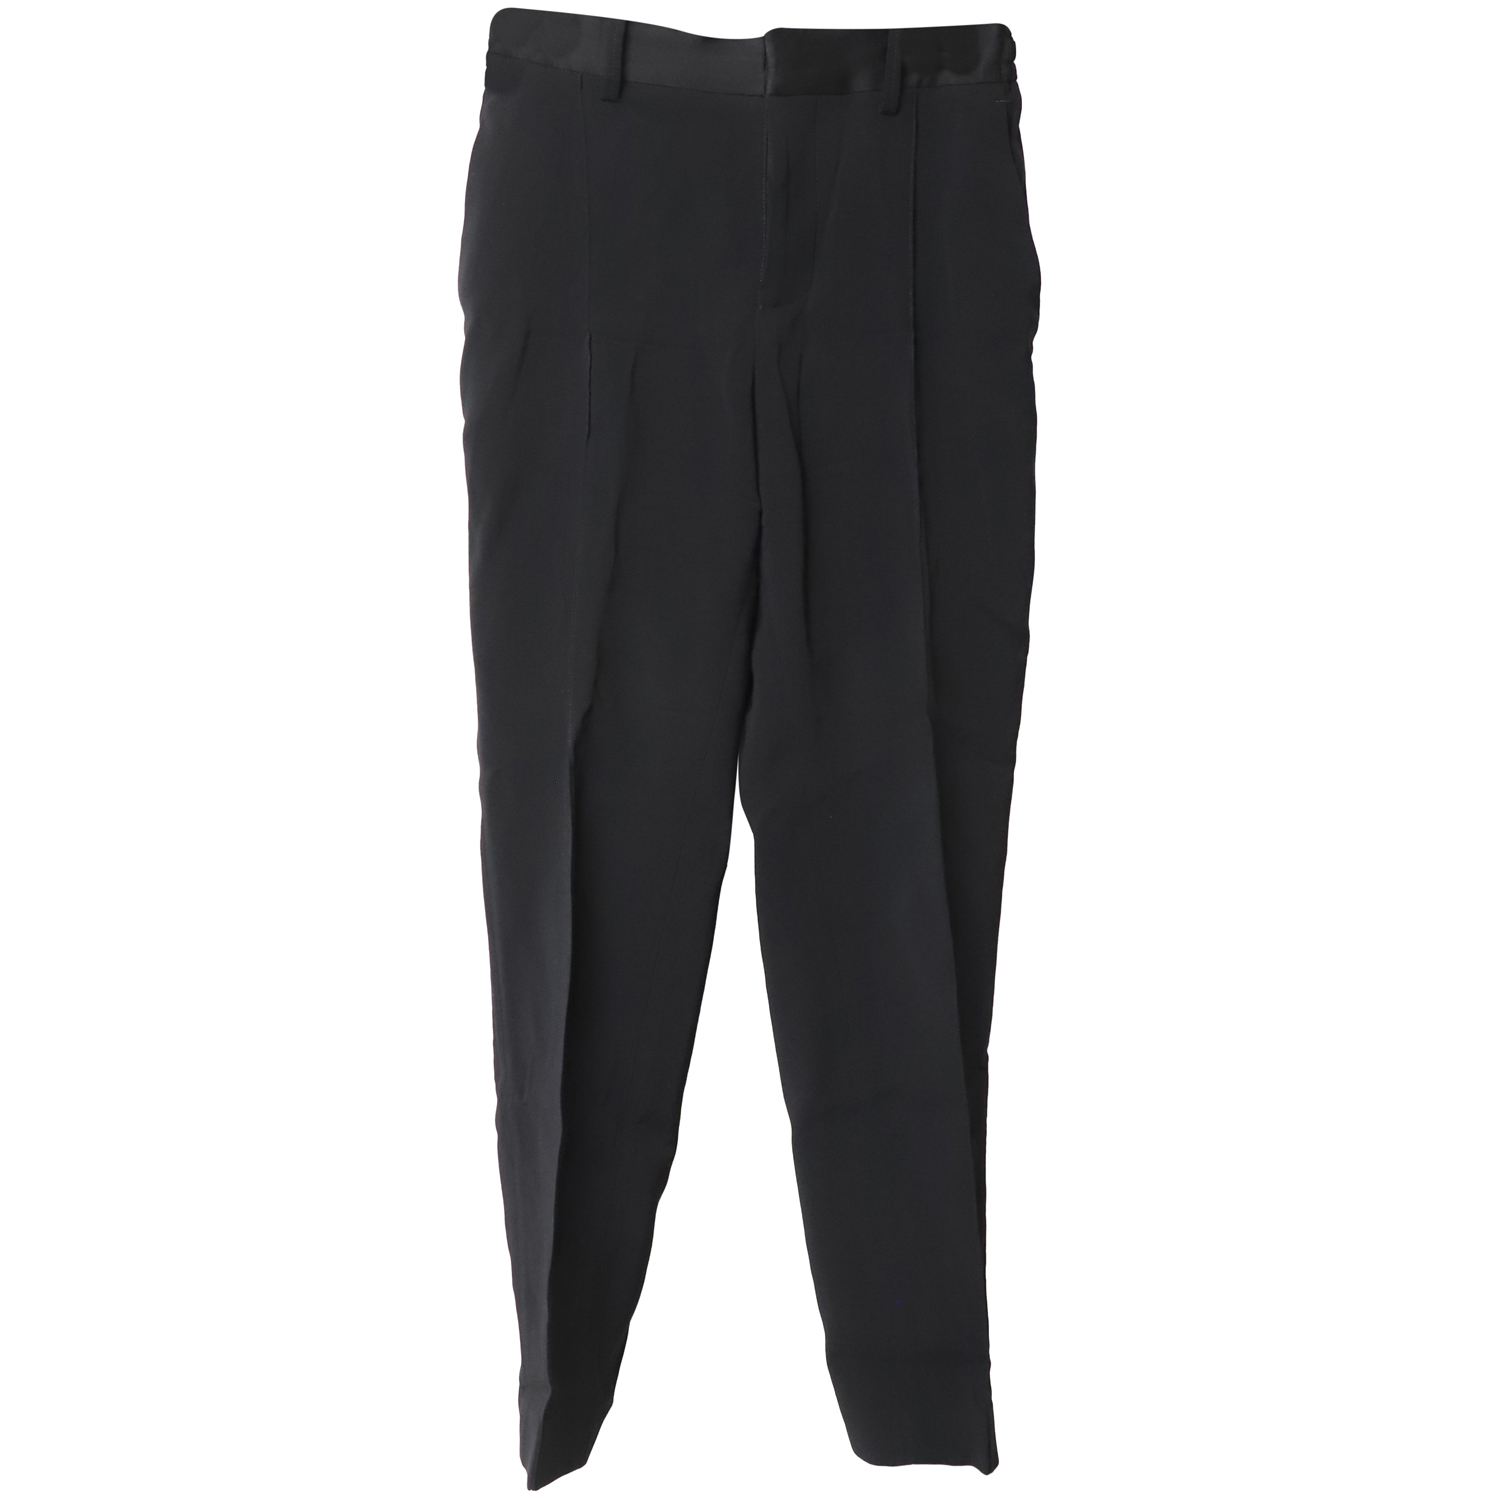 Refined Black Trouser Pants with Tapered Silhouette